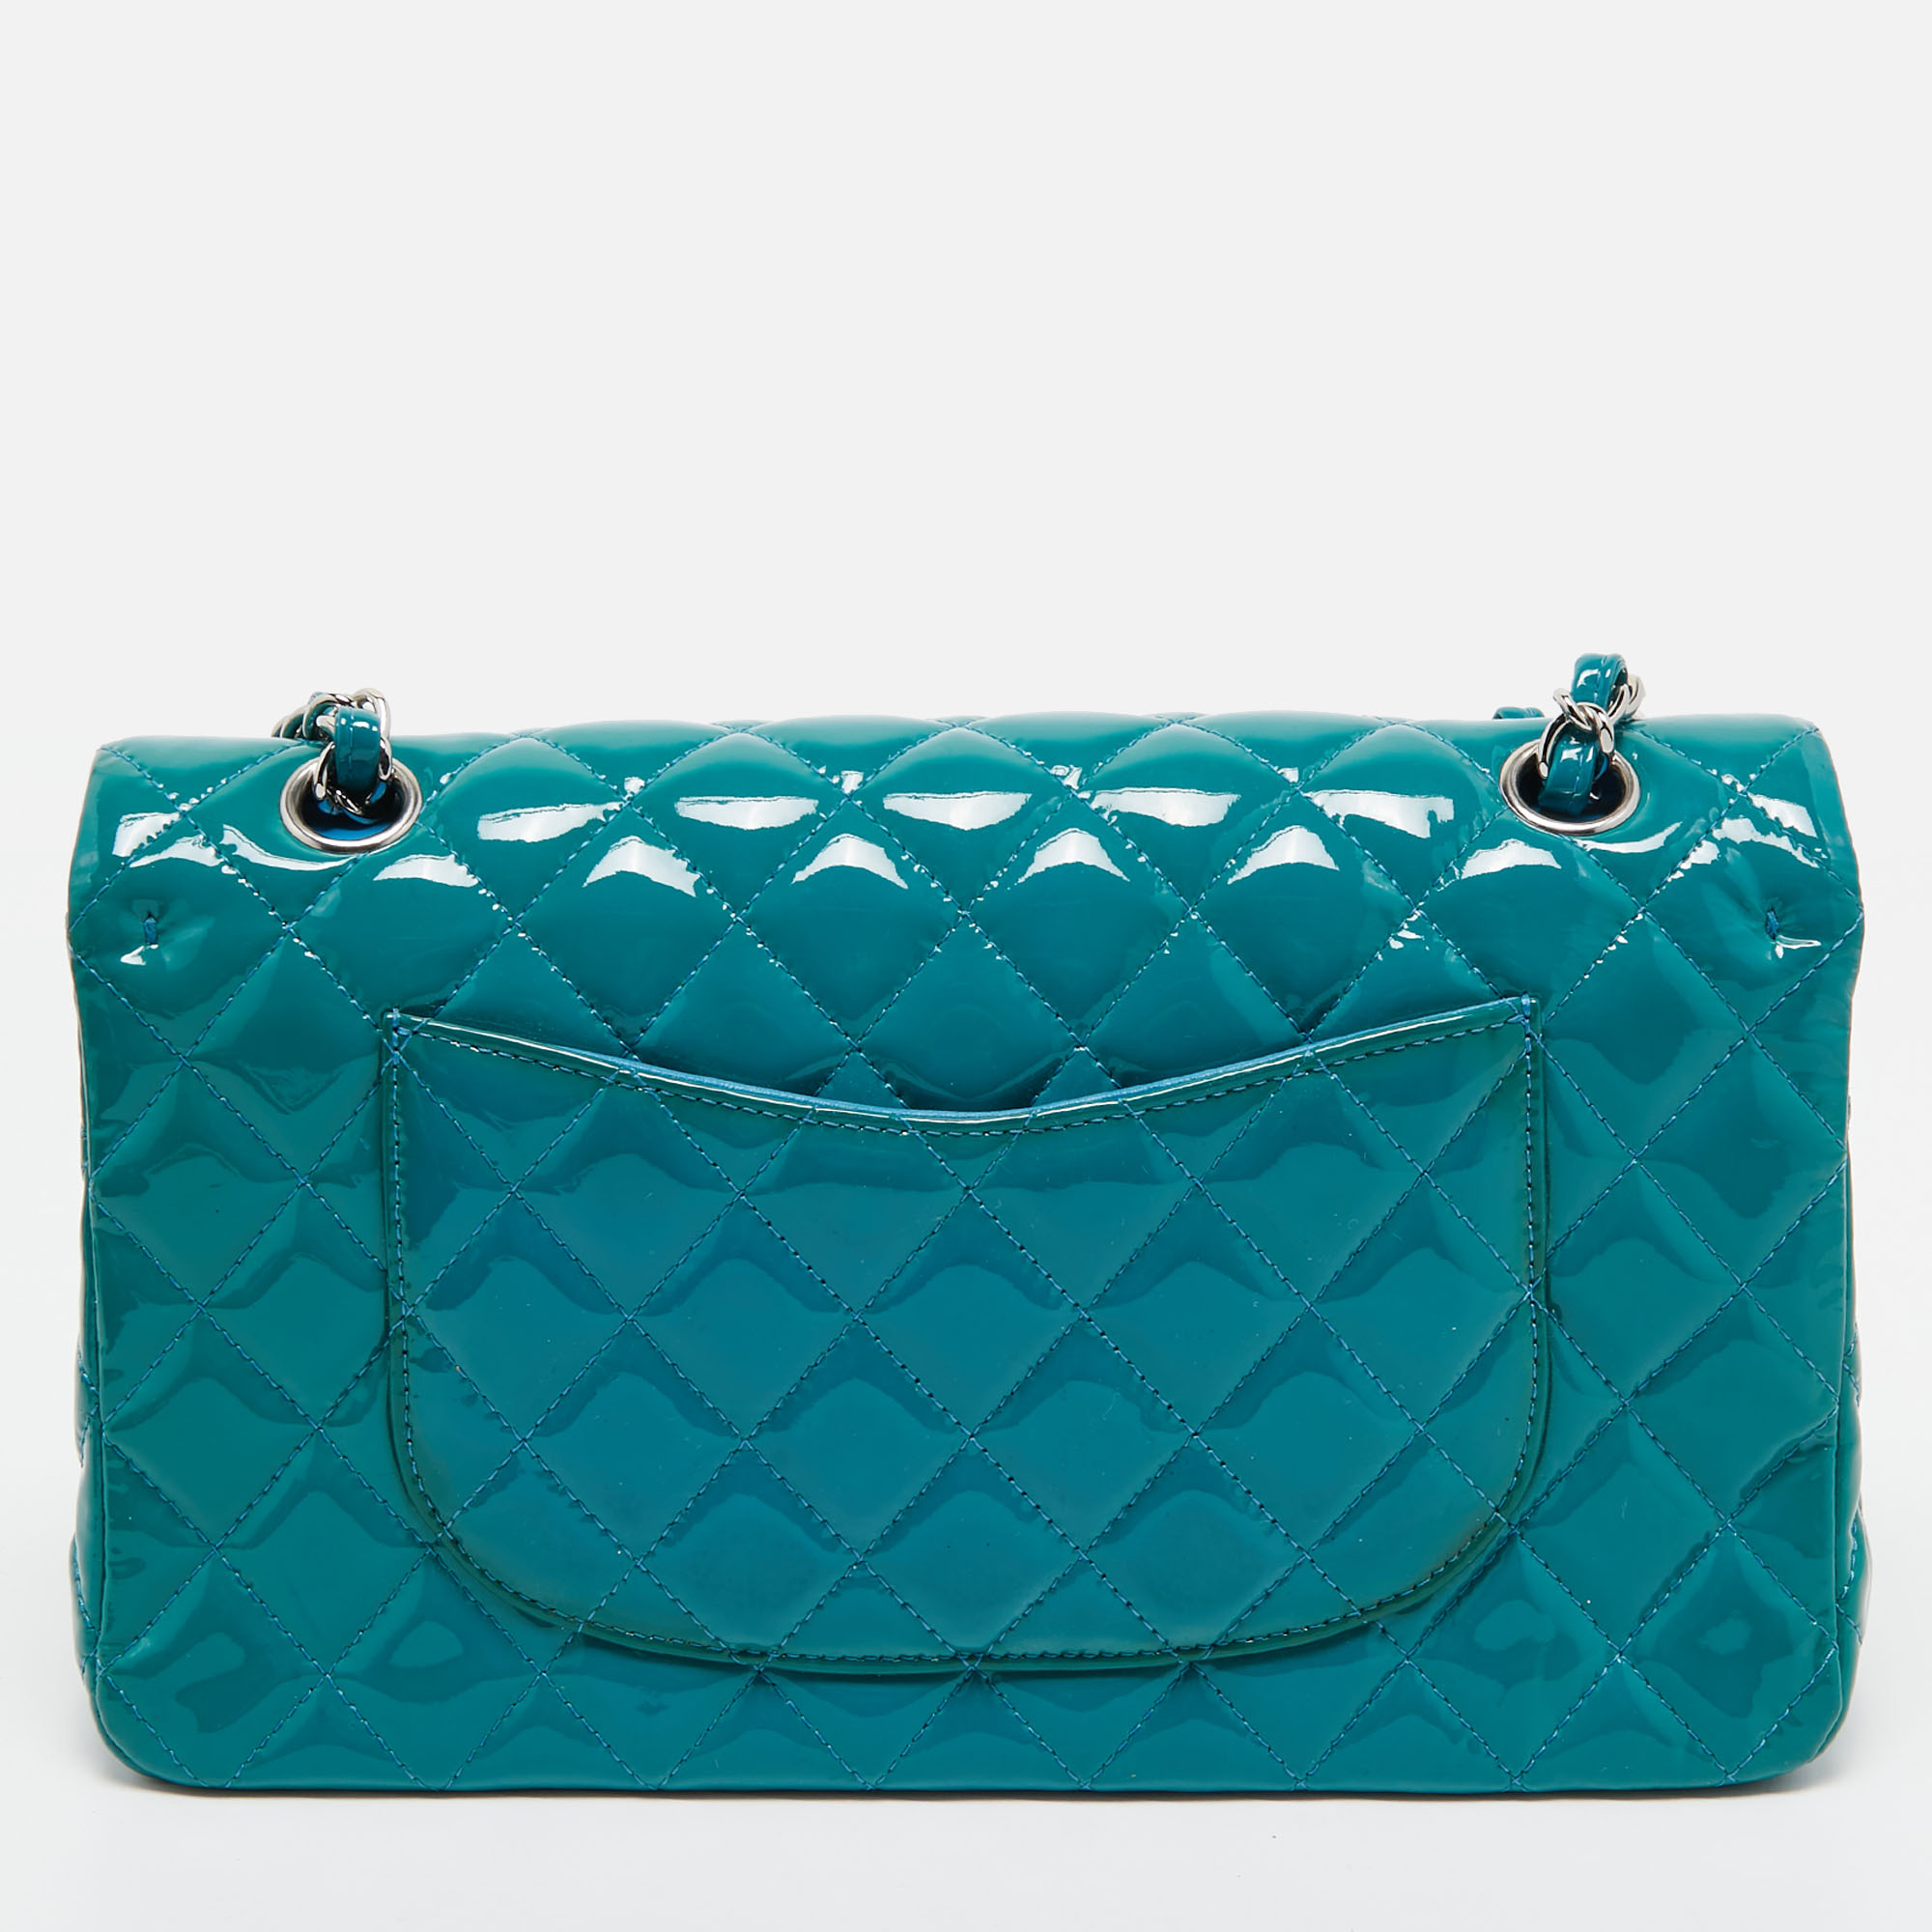 Chanel Teal Blue Quilted Patent Leather Medium Classic Double Flap Bag